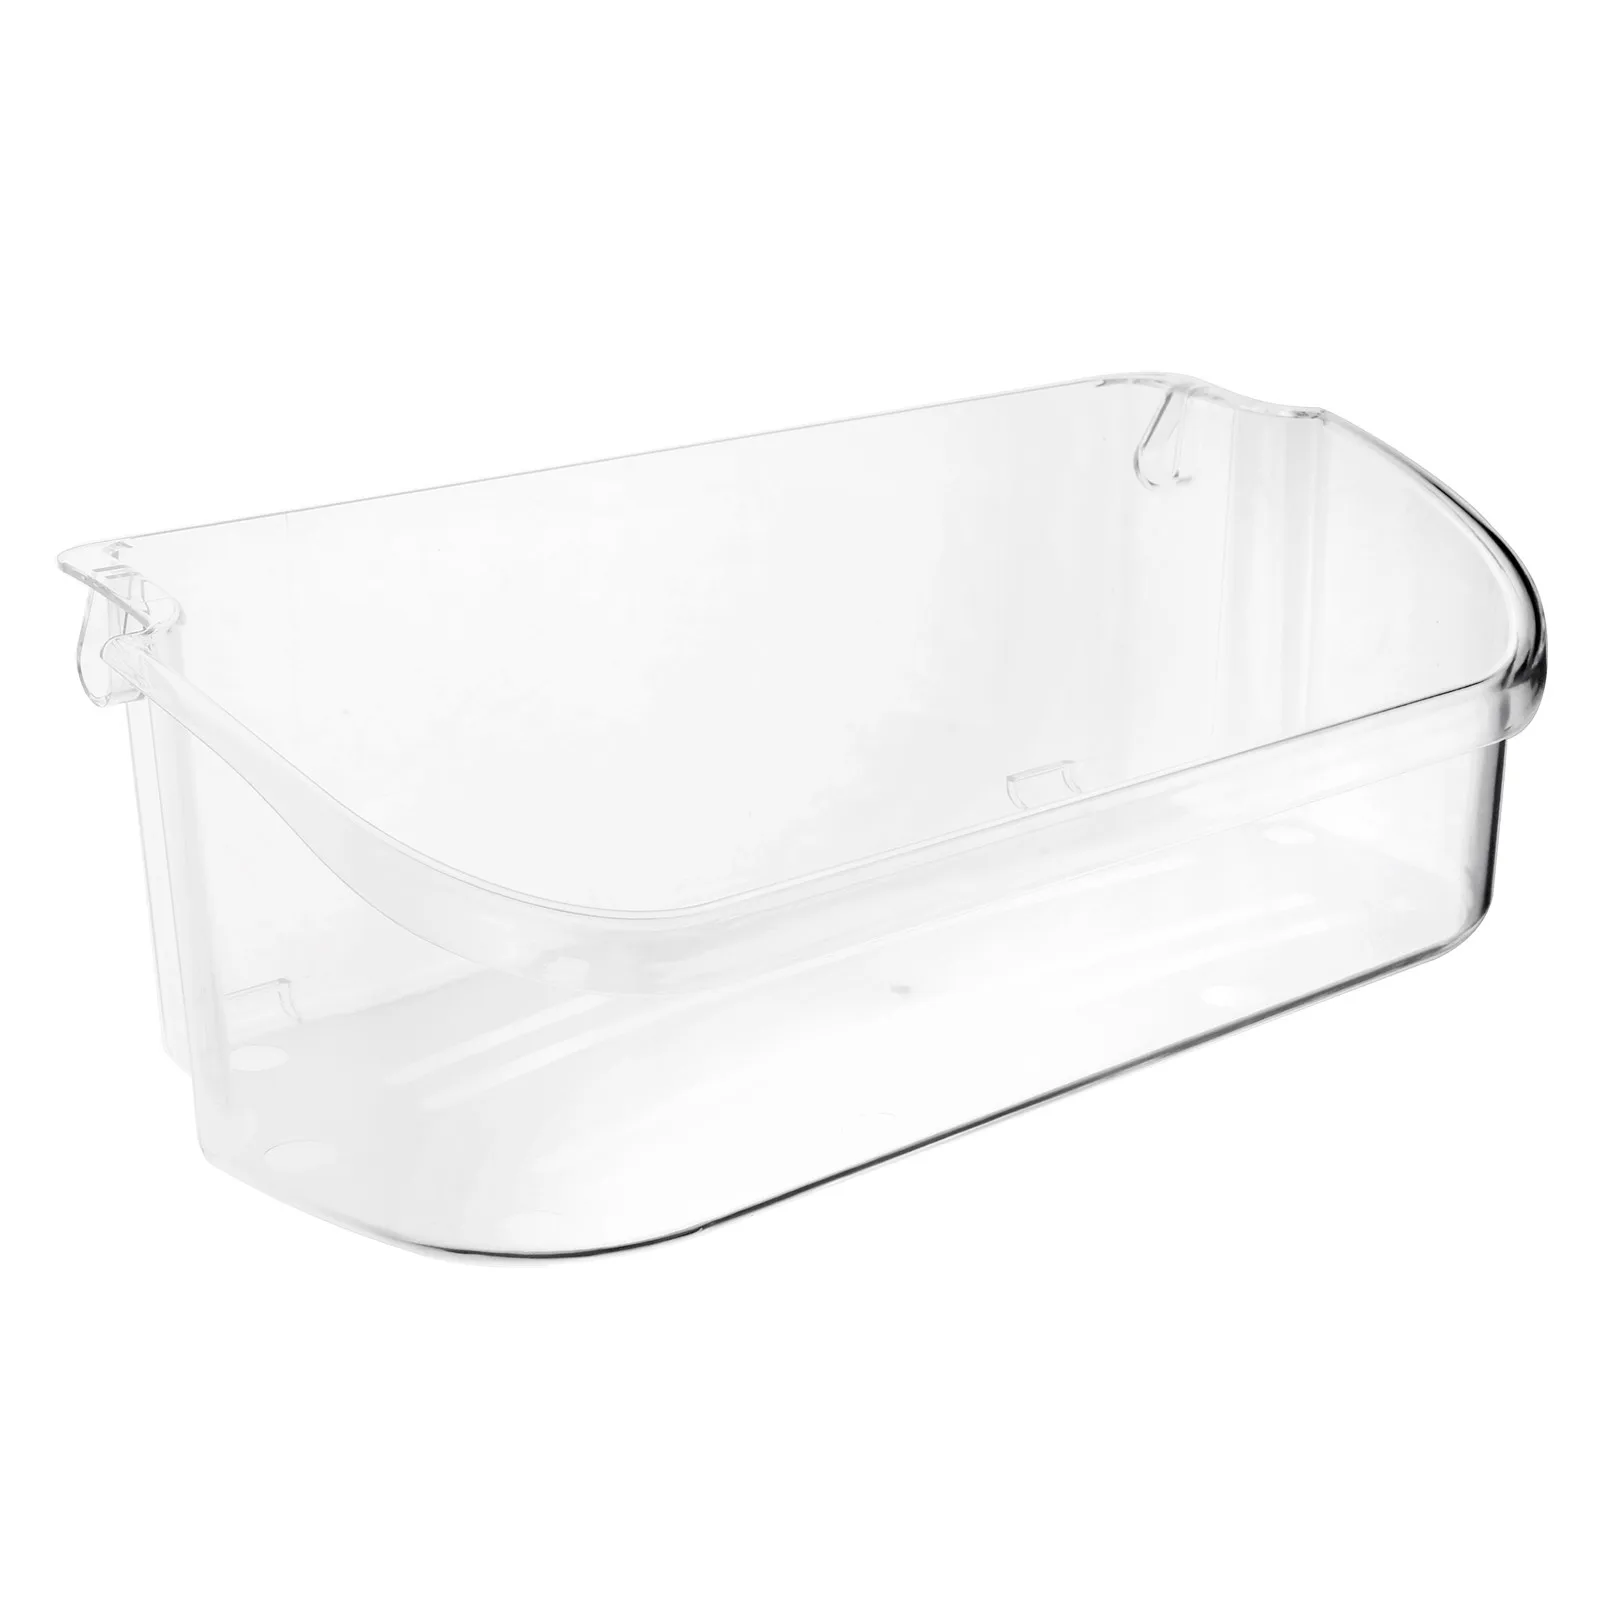 

1pc 240356402 Refrigerator Clear Door Bin Shelves fit for Frigidaire/ Electrolux/Kenmore 240356402 240356407 240356408 Replace